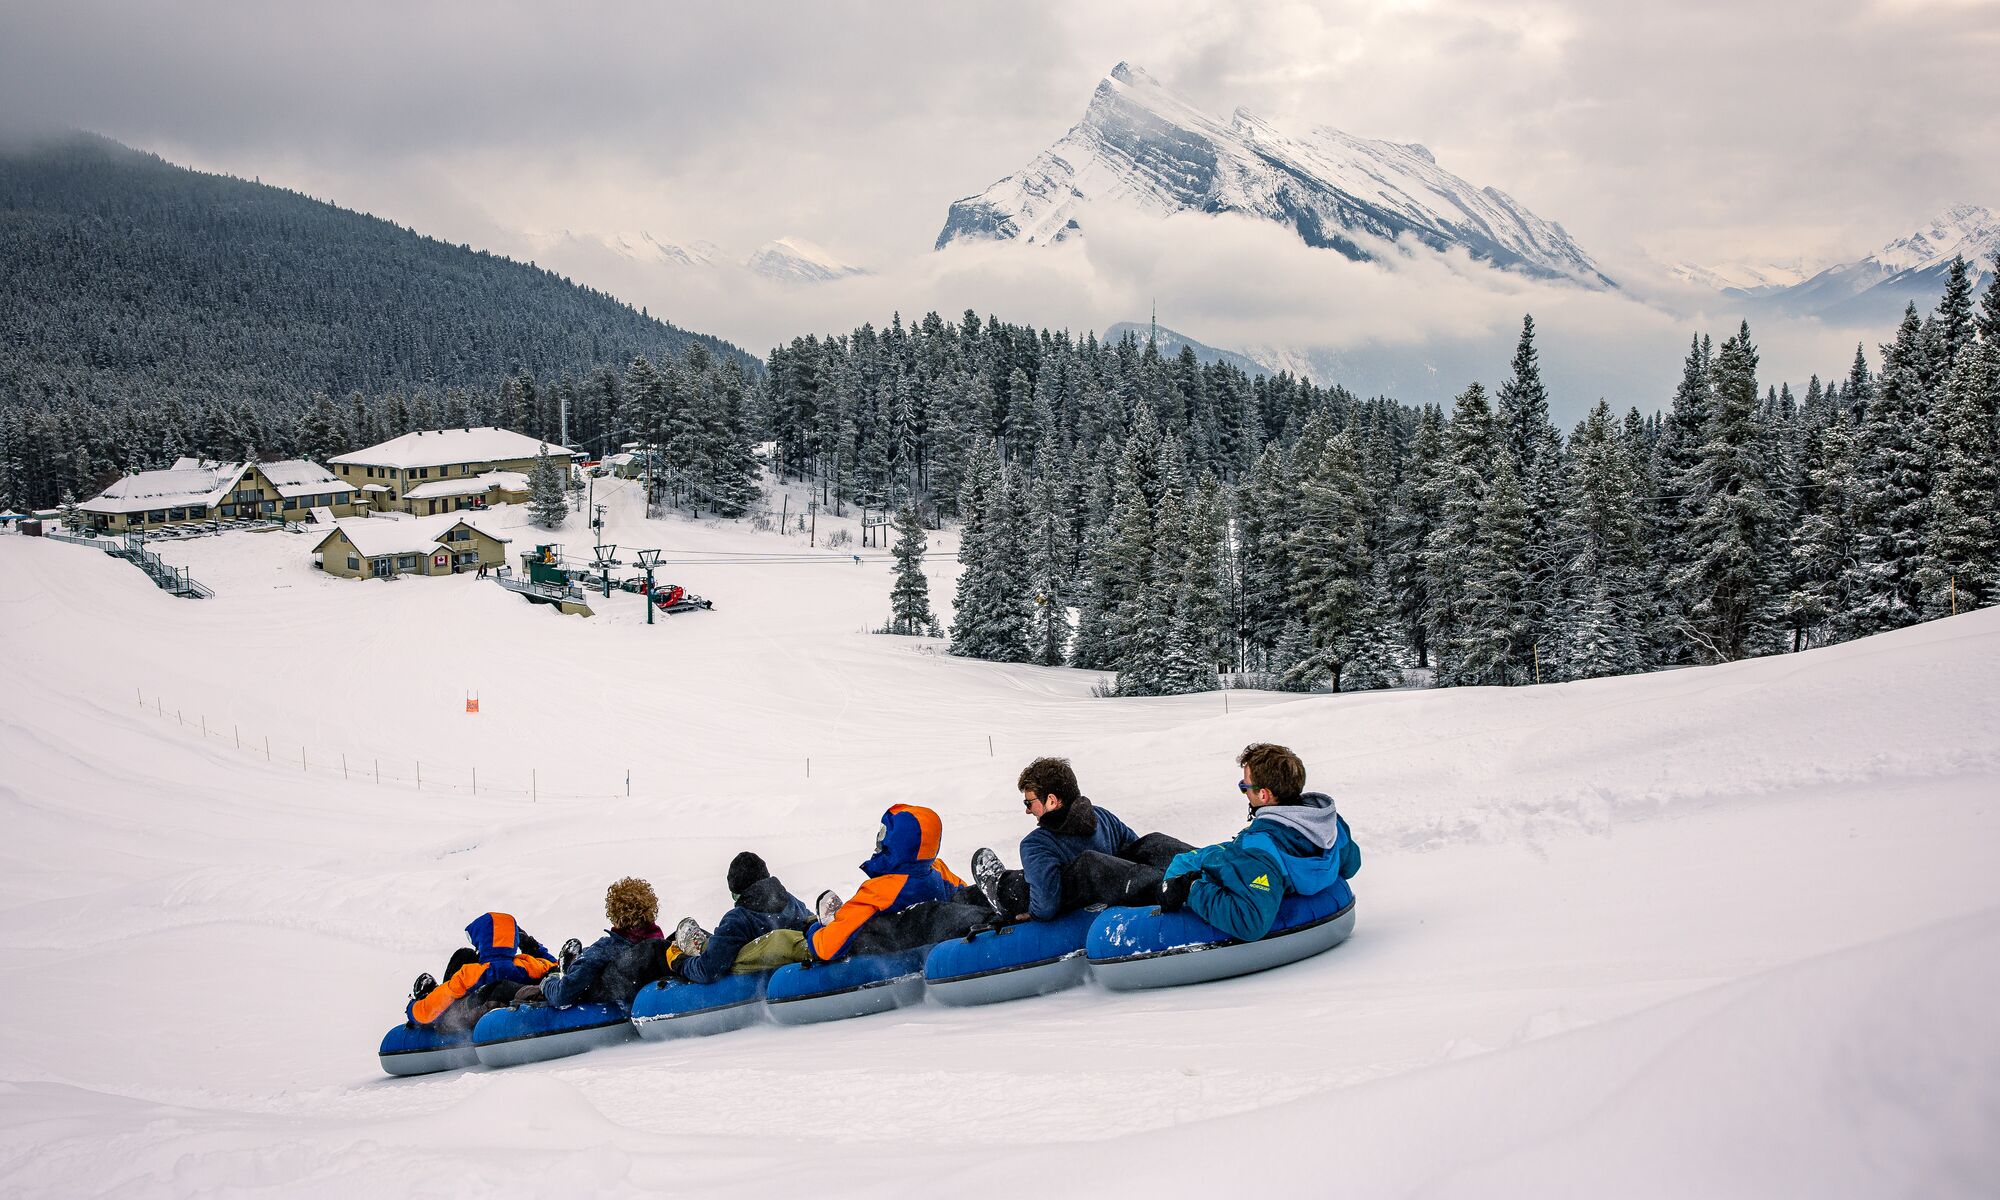 A group of 6 friends tube down a snowy hill together at the Mt. Norquay Ski Resort